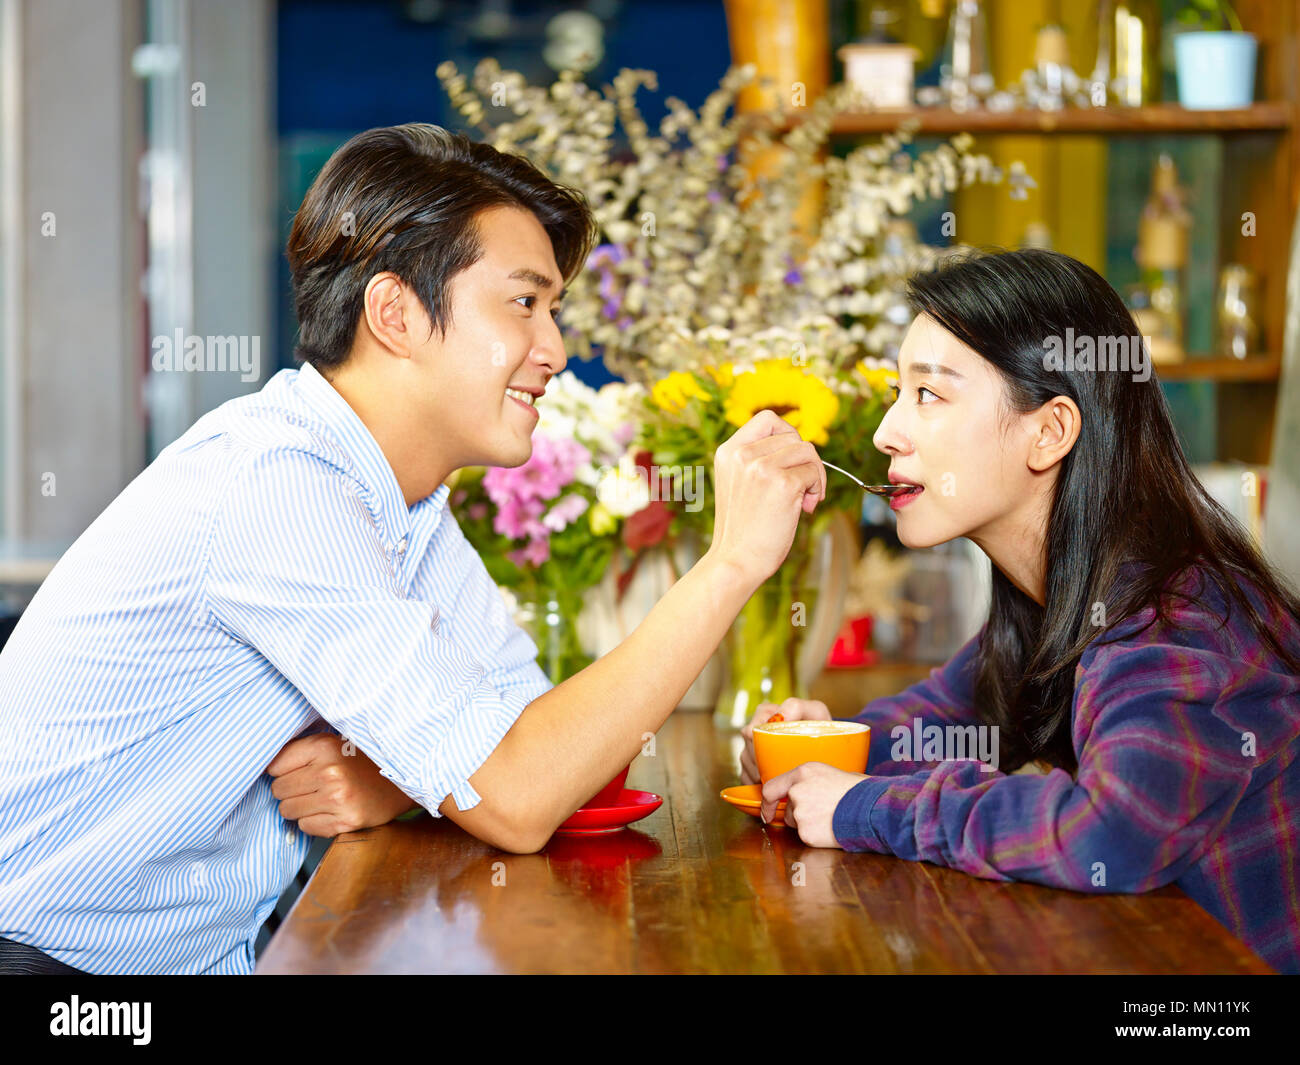 young loving and playful asian couple having fun in coffee shop Stock Photo